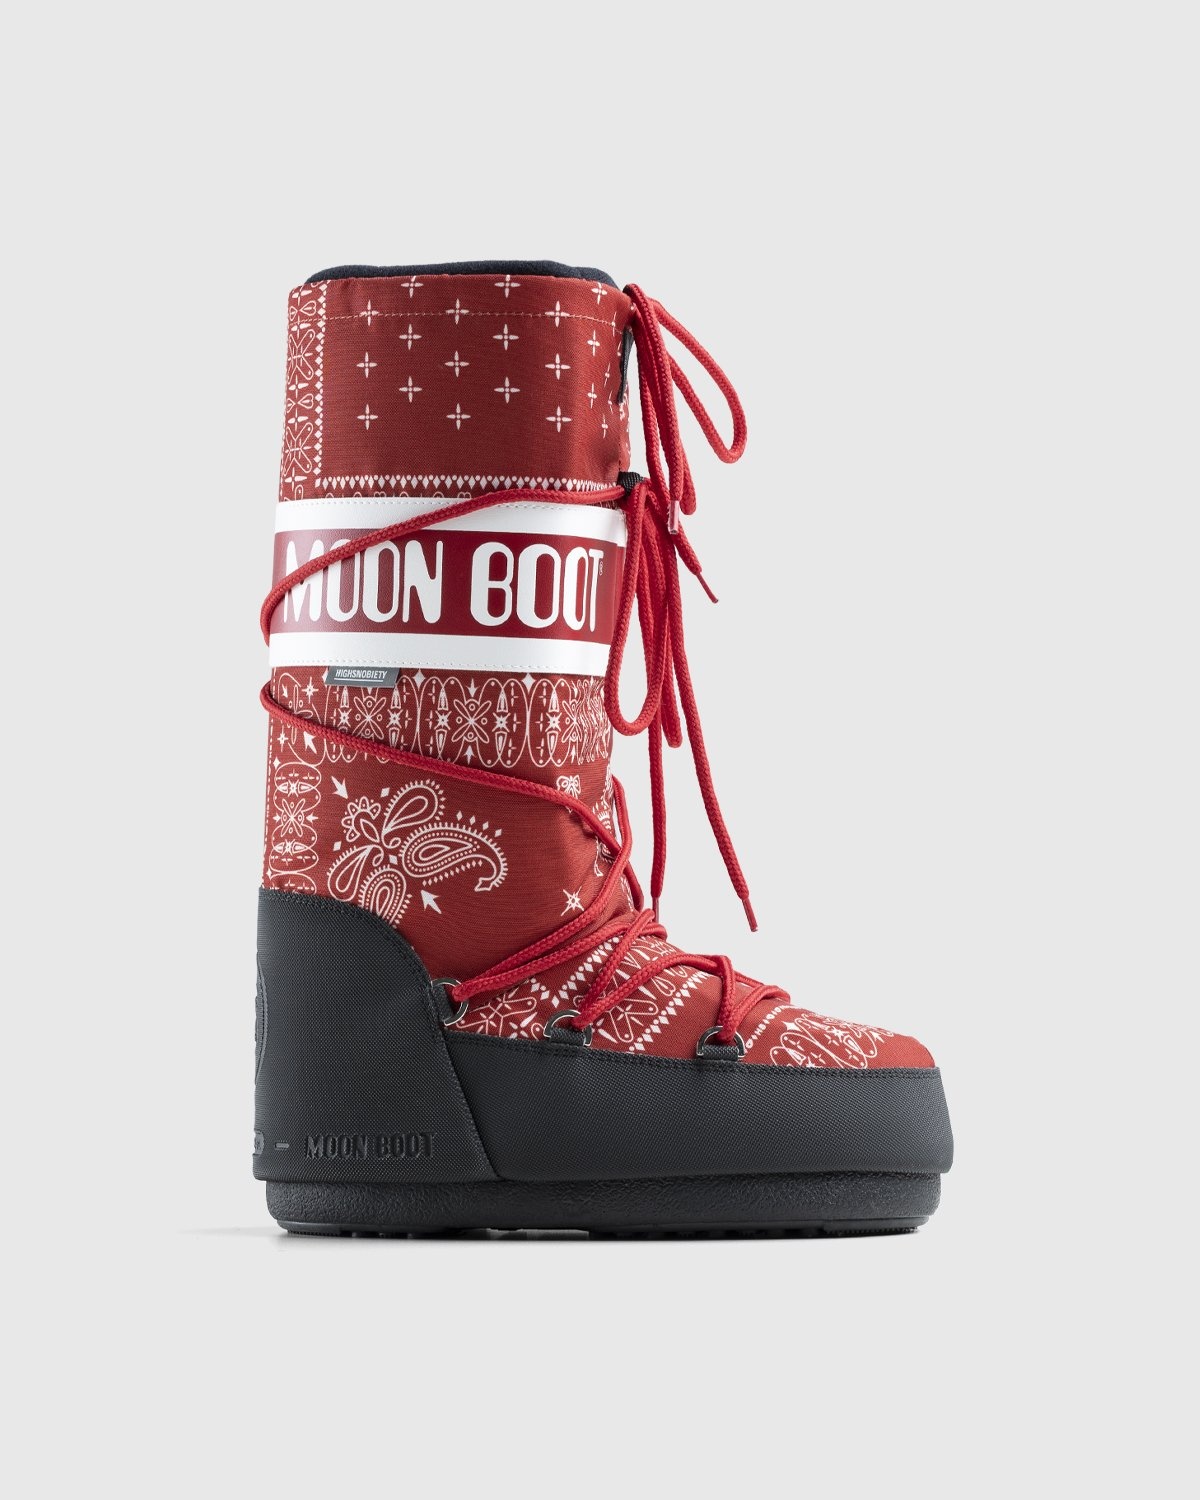 Icon Low Nylon Snow Boots in Red - Moon Boot